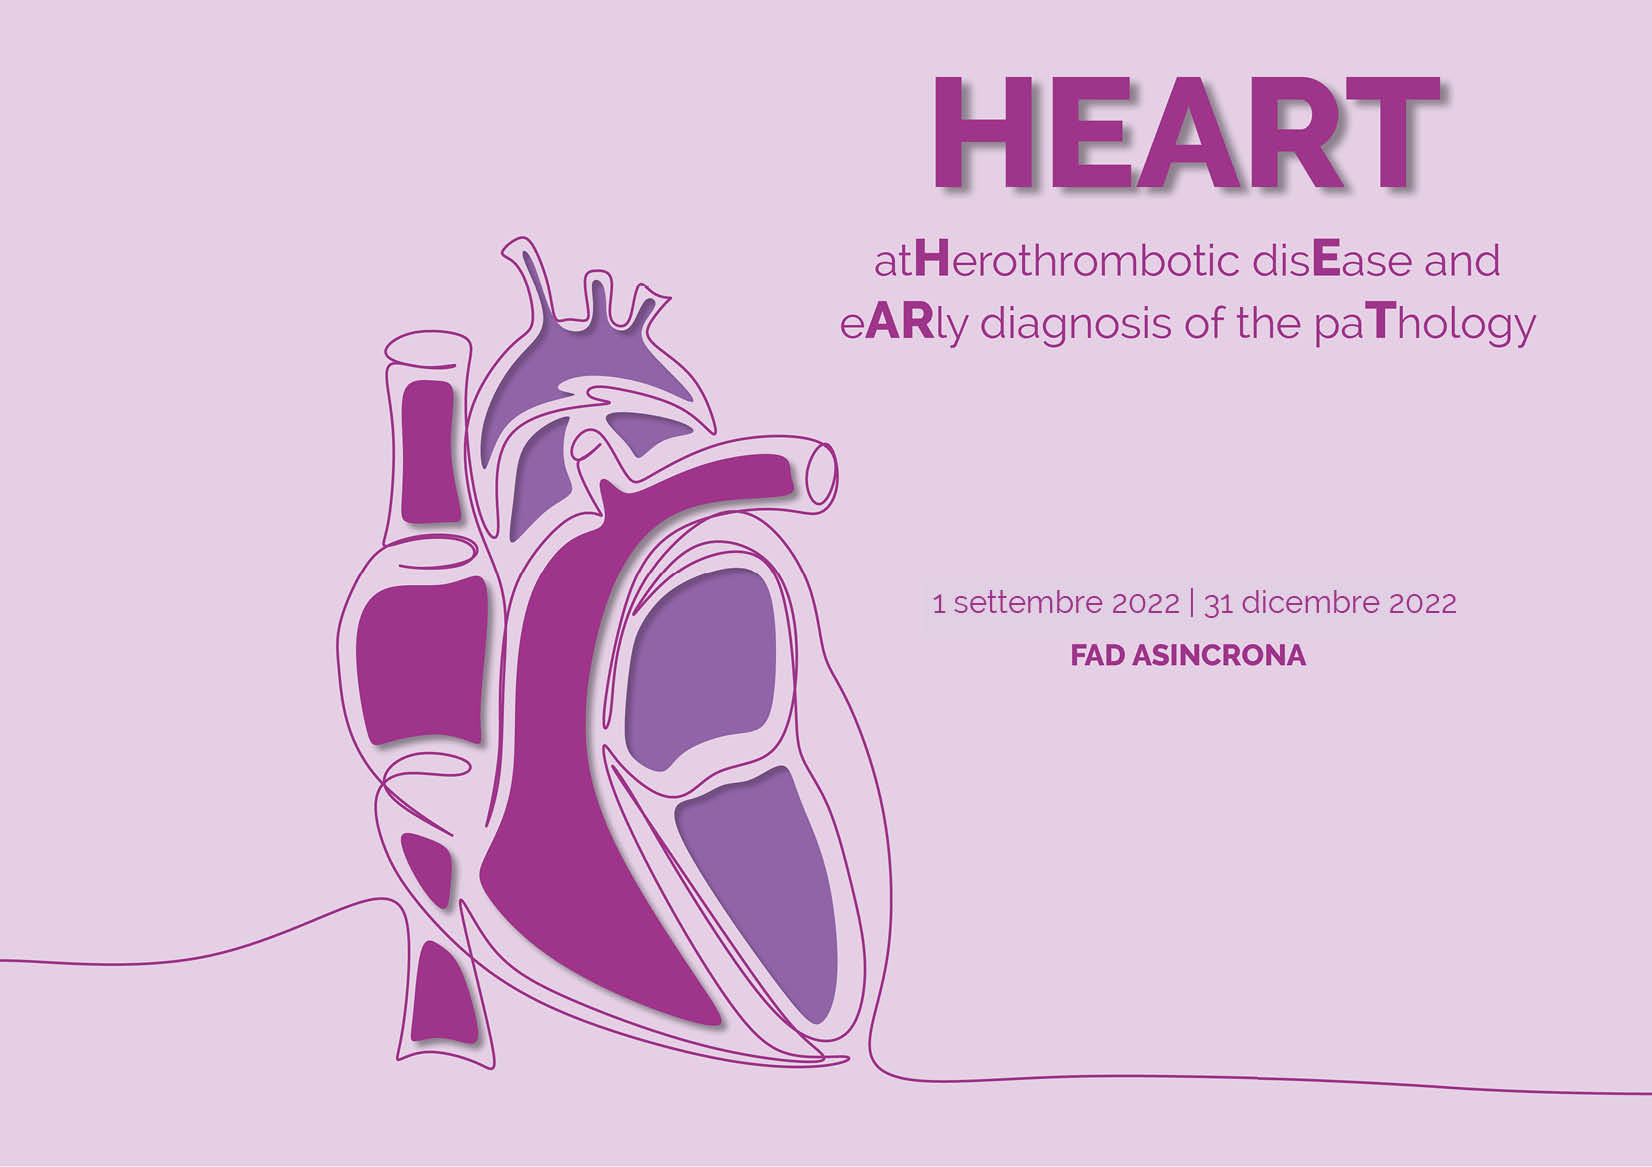 HEART – atHerothrombotic disEase and eARly diagnosis of the paThology